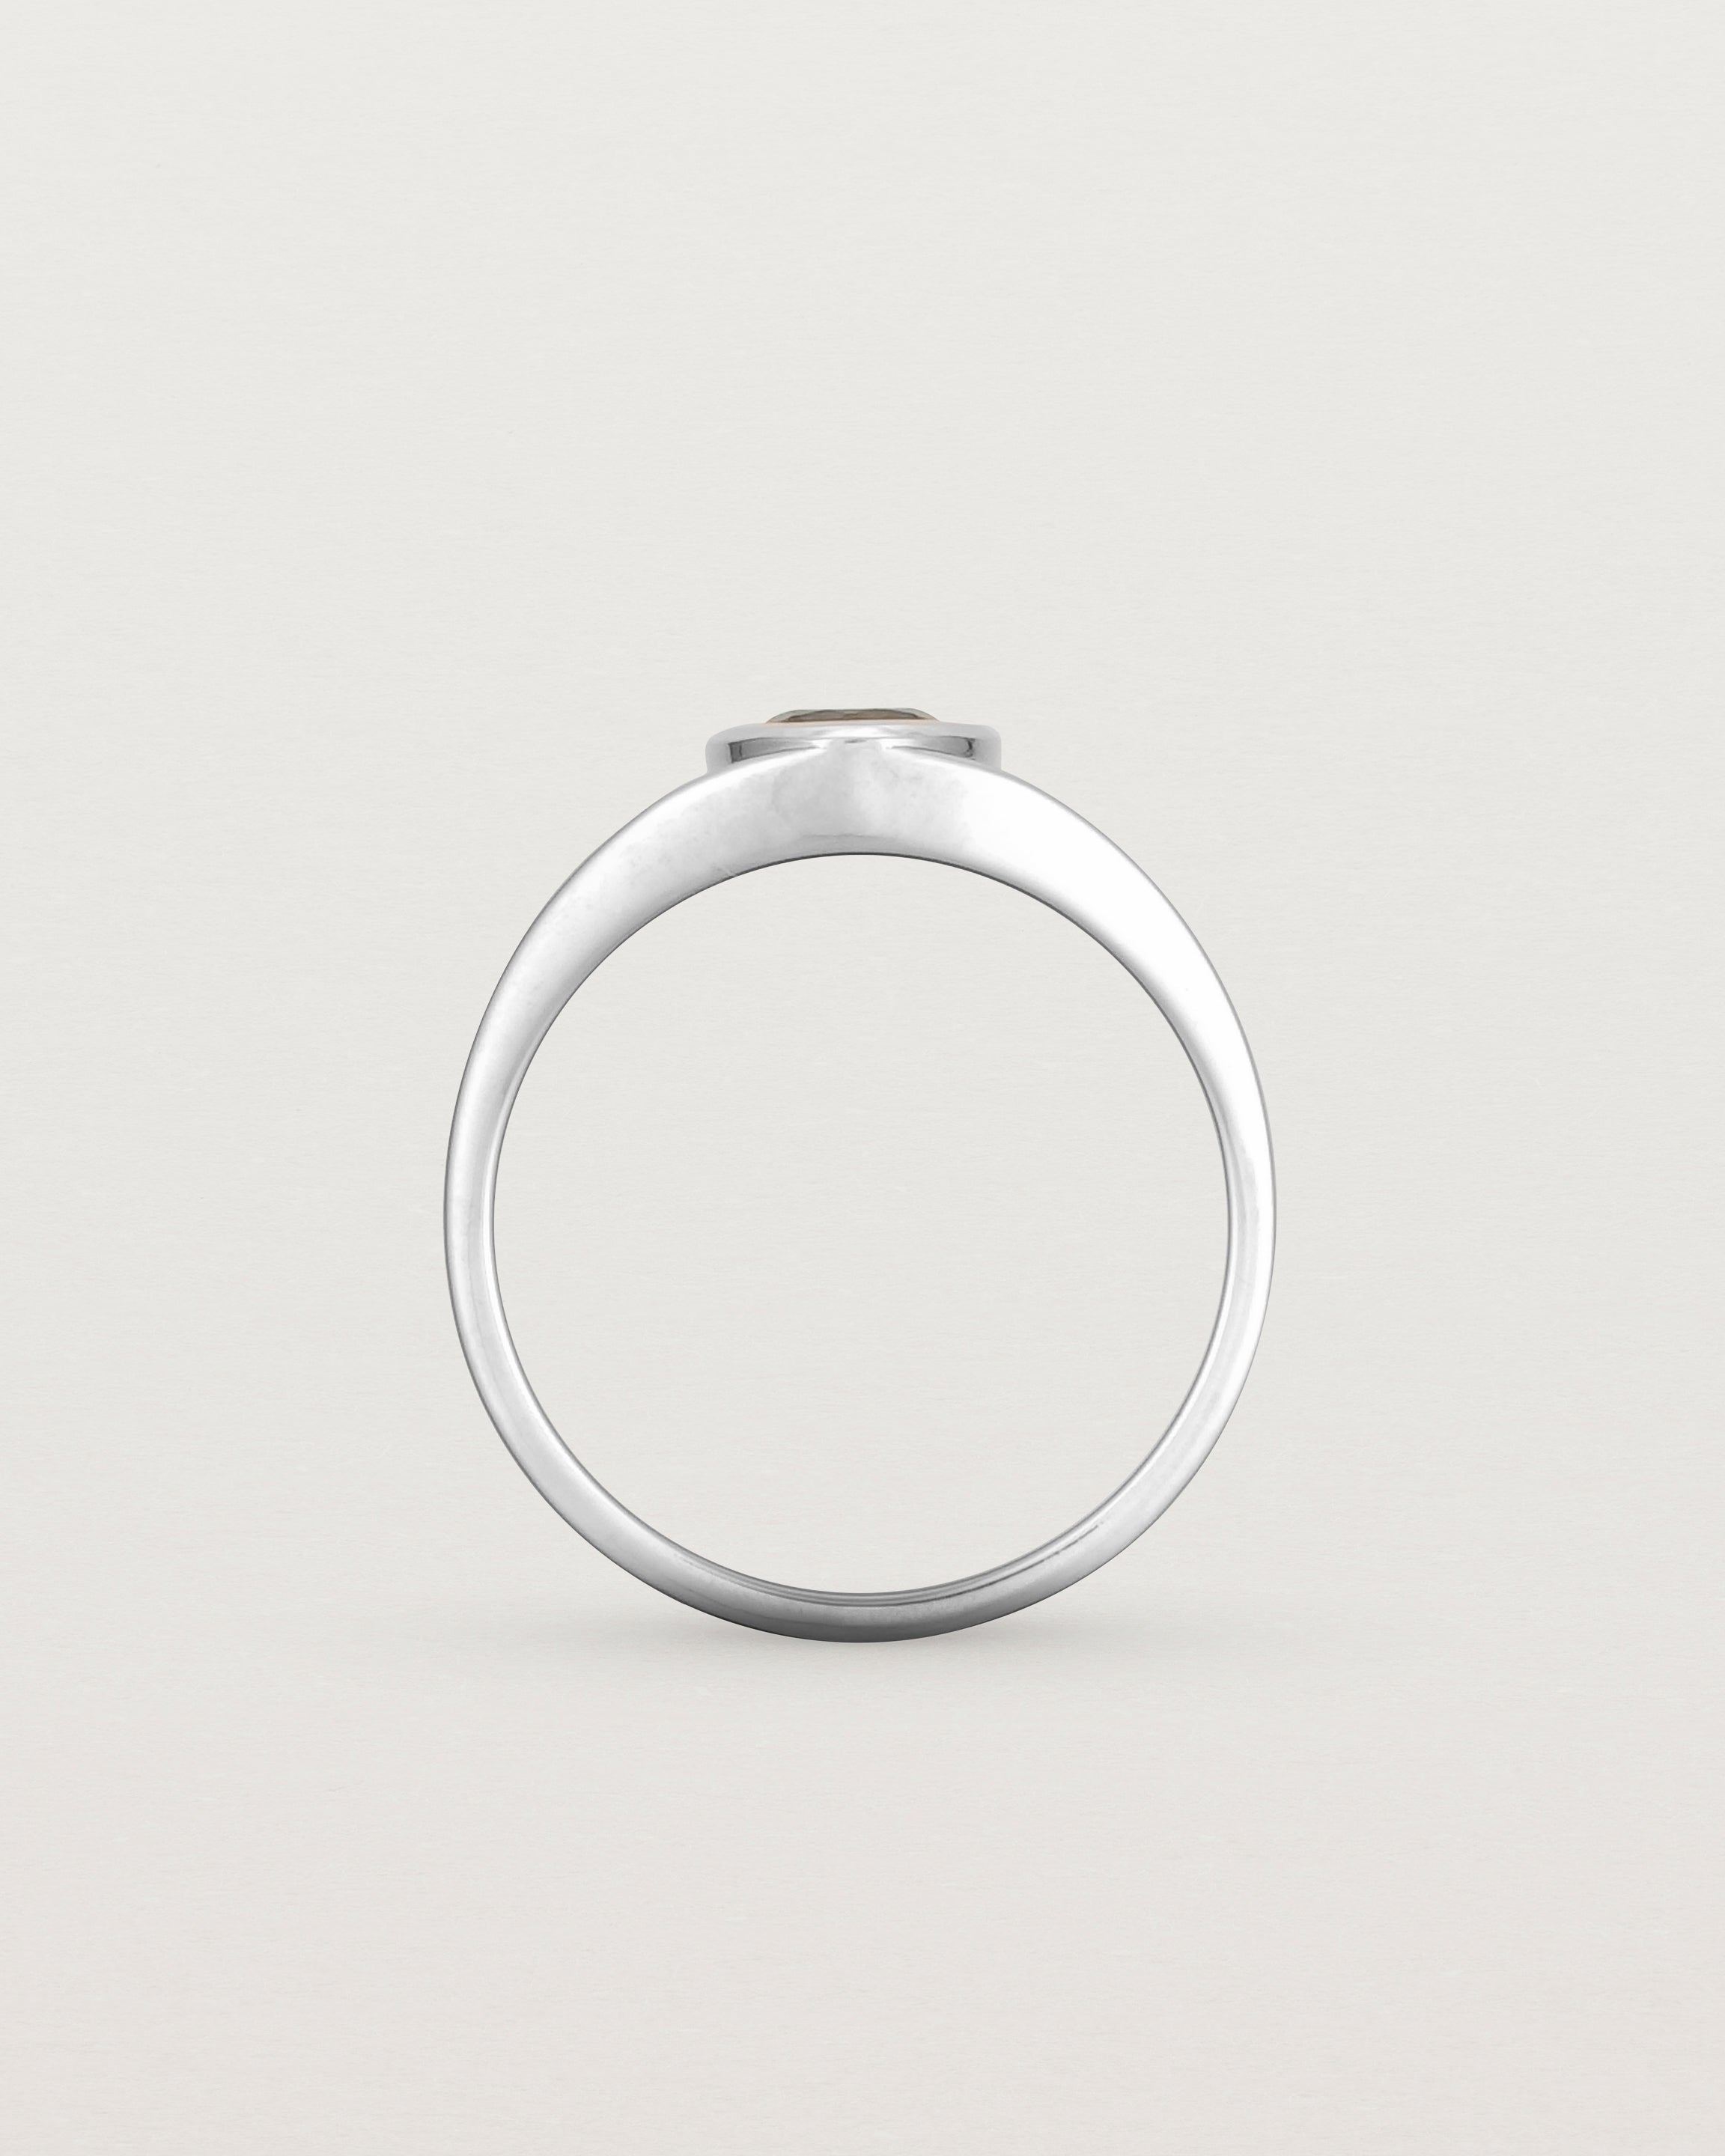 standing view of the Amos Ring | Australian Sapphire in white Gold.